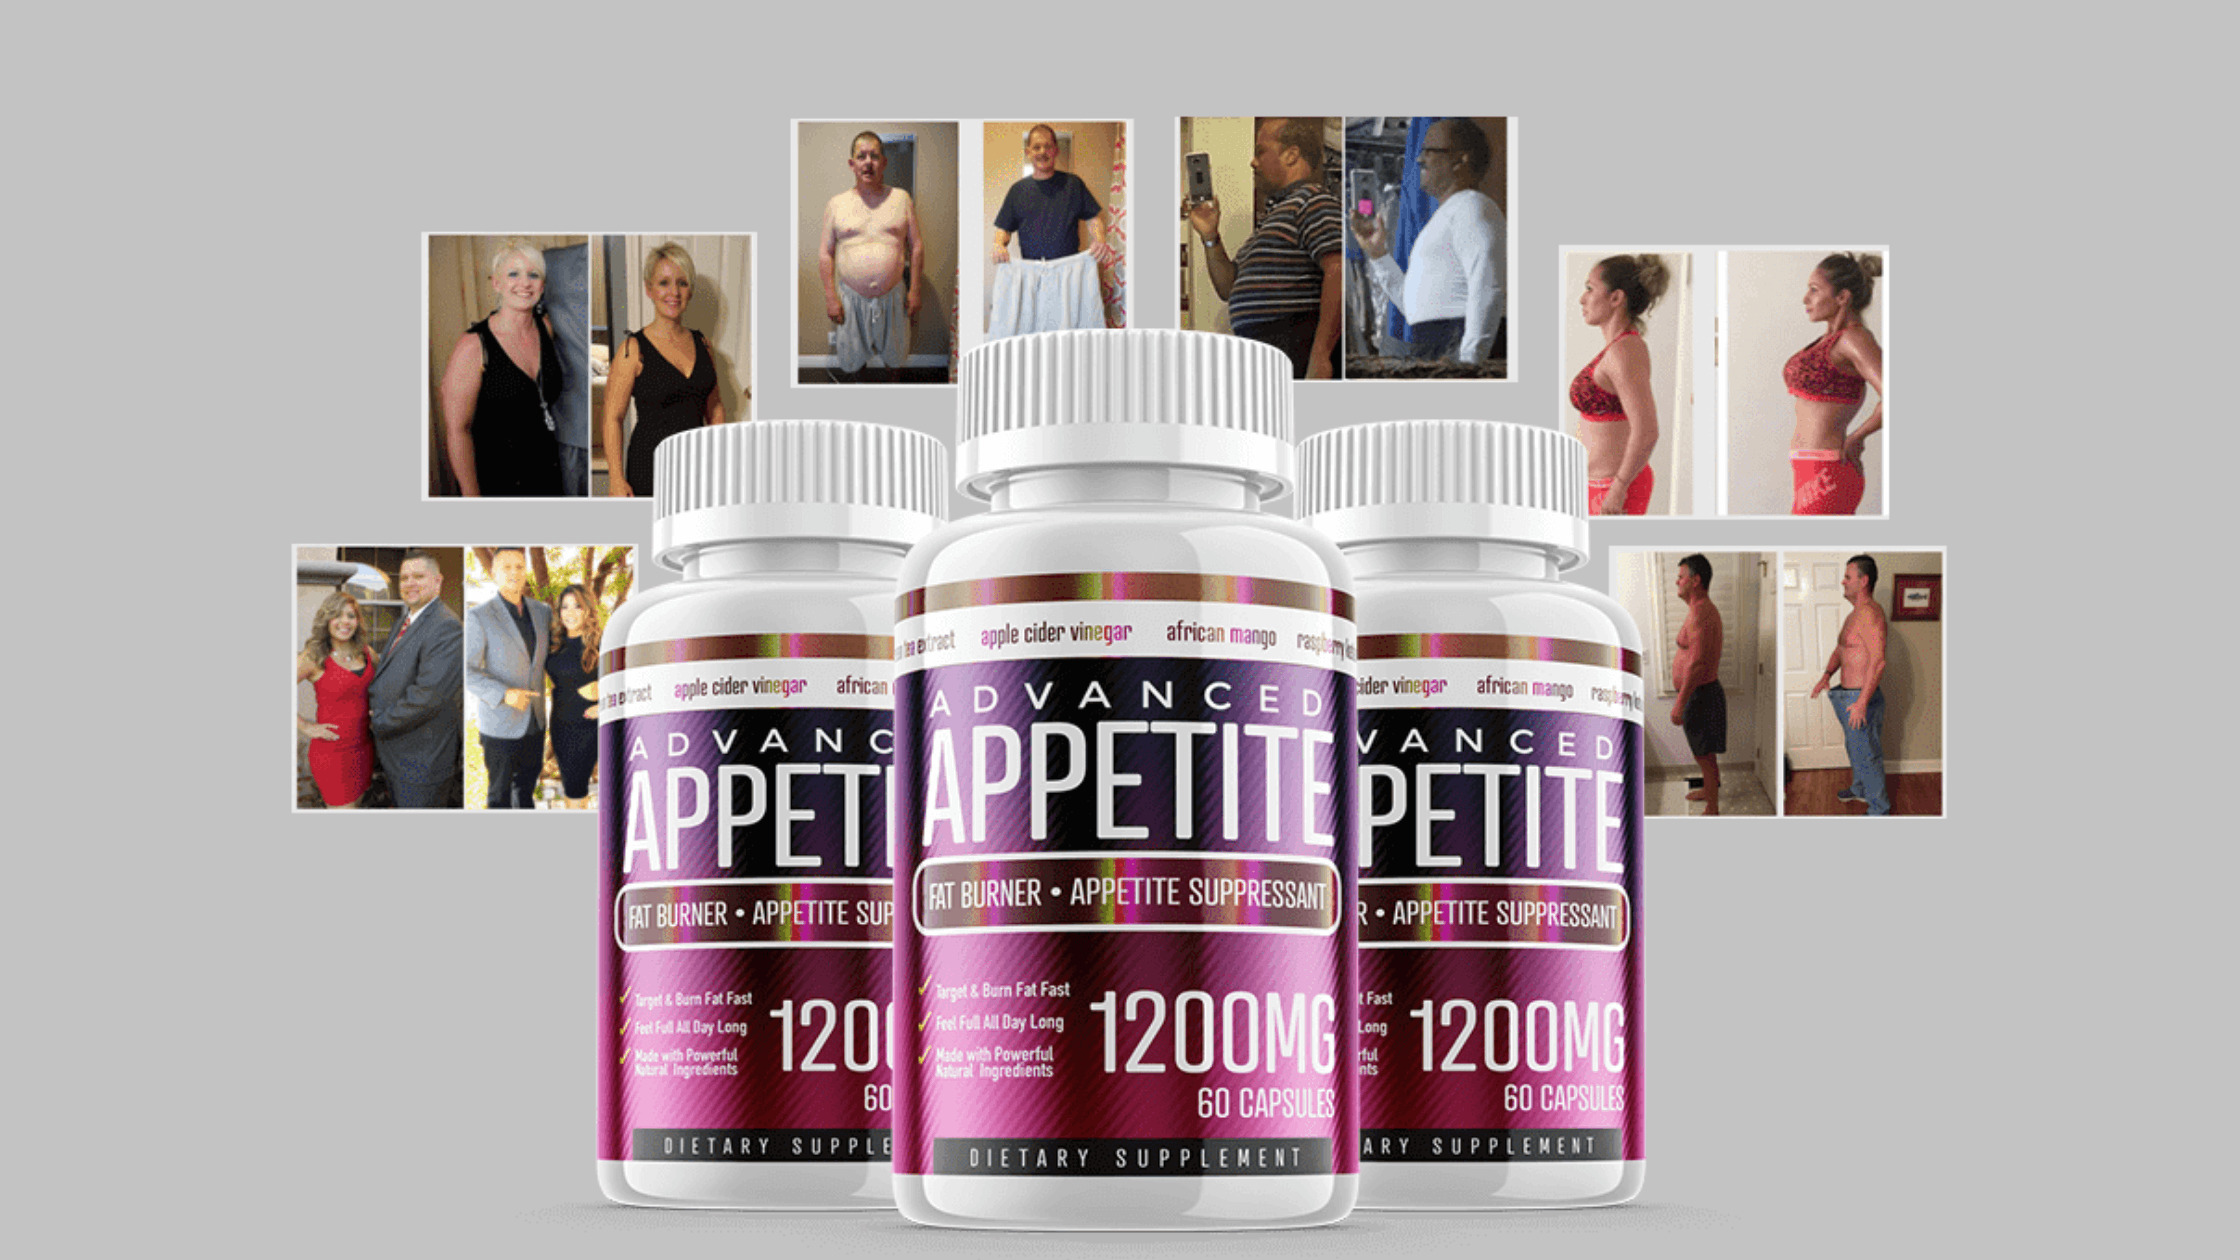 Advanced Appetite Fat Burner Canada Reviews: Is It Safe or Have Any Side  Effects? - MarylandReporter.com